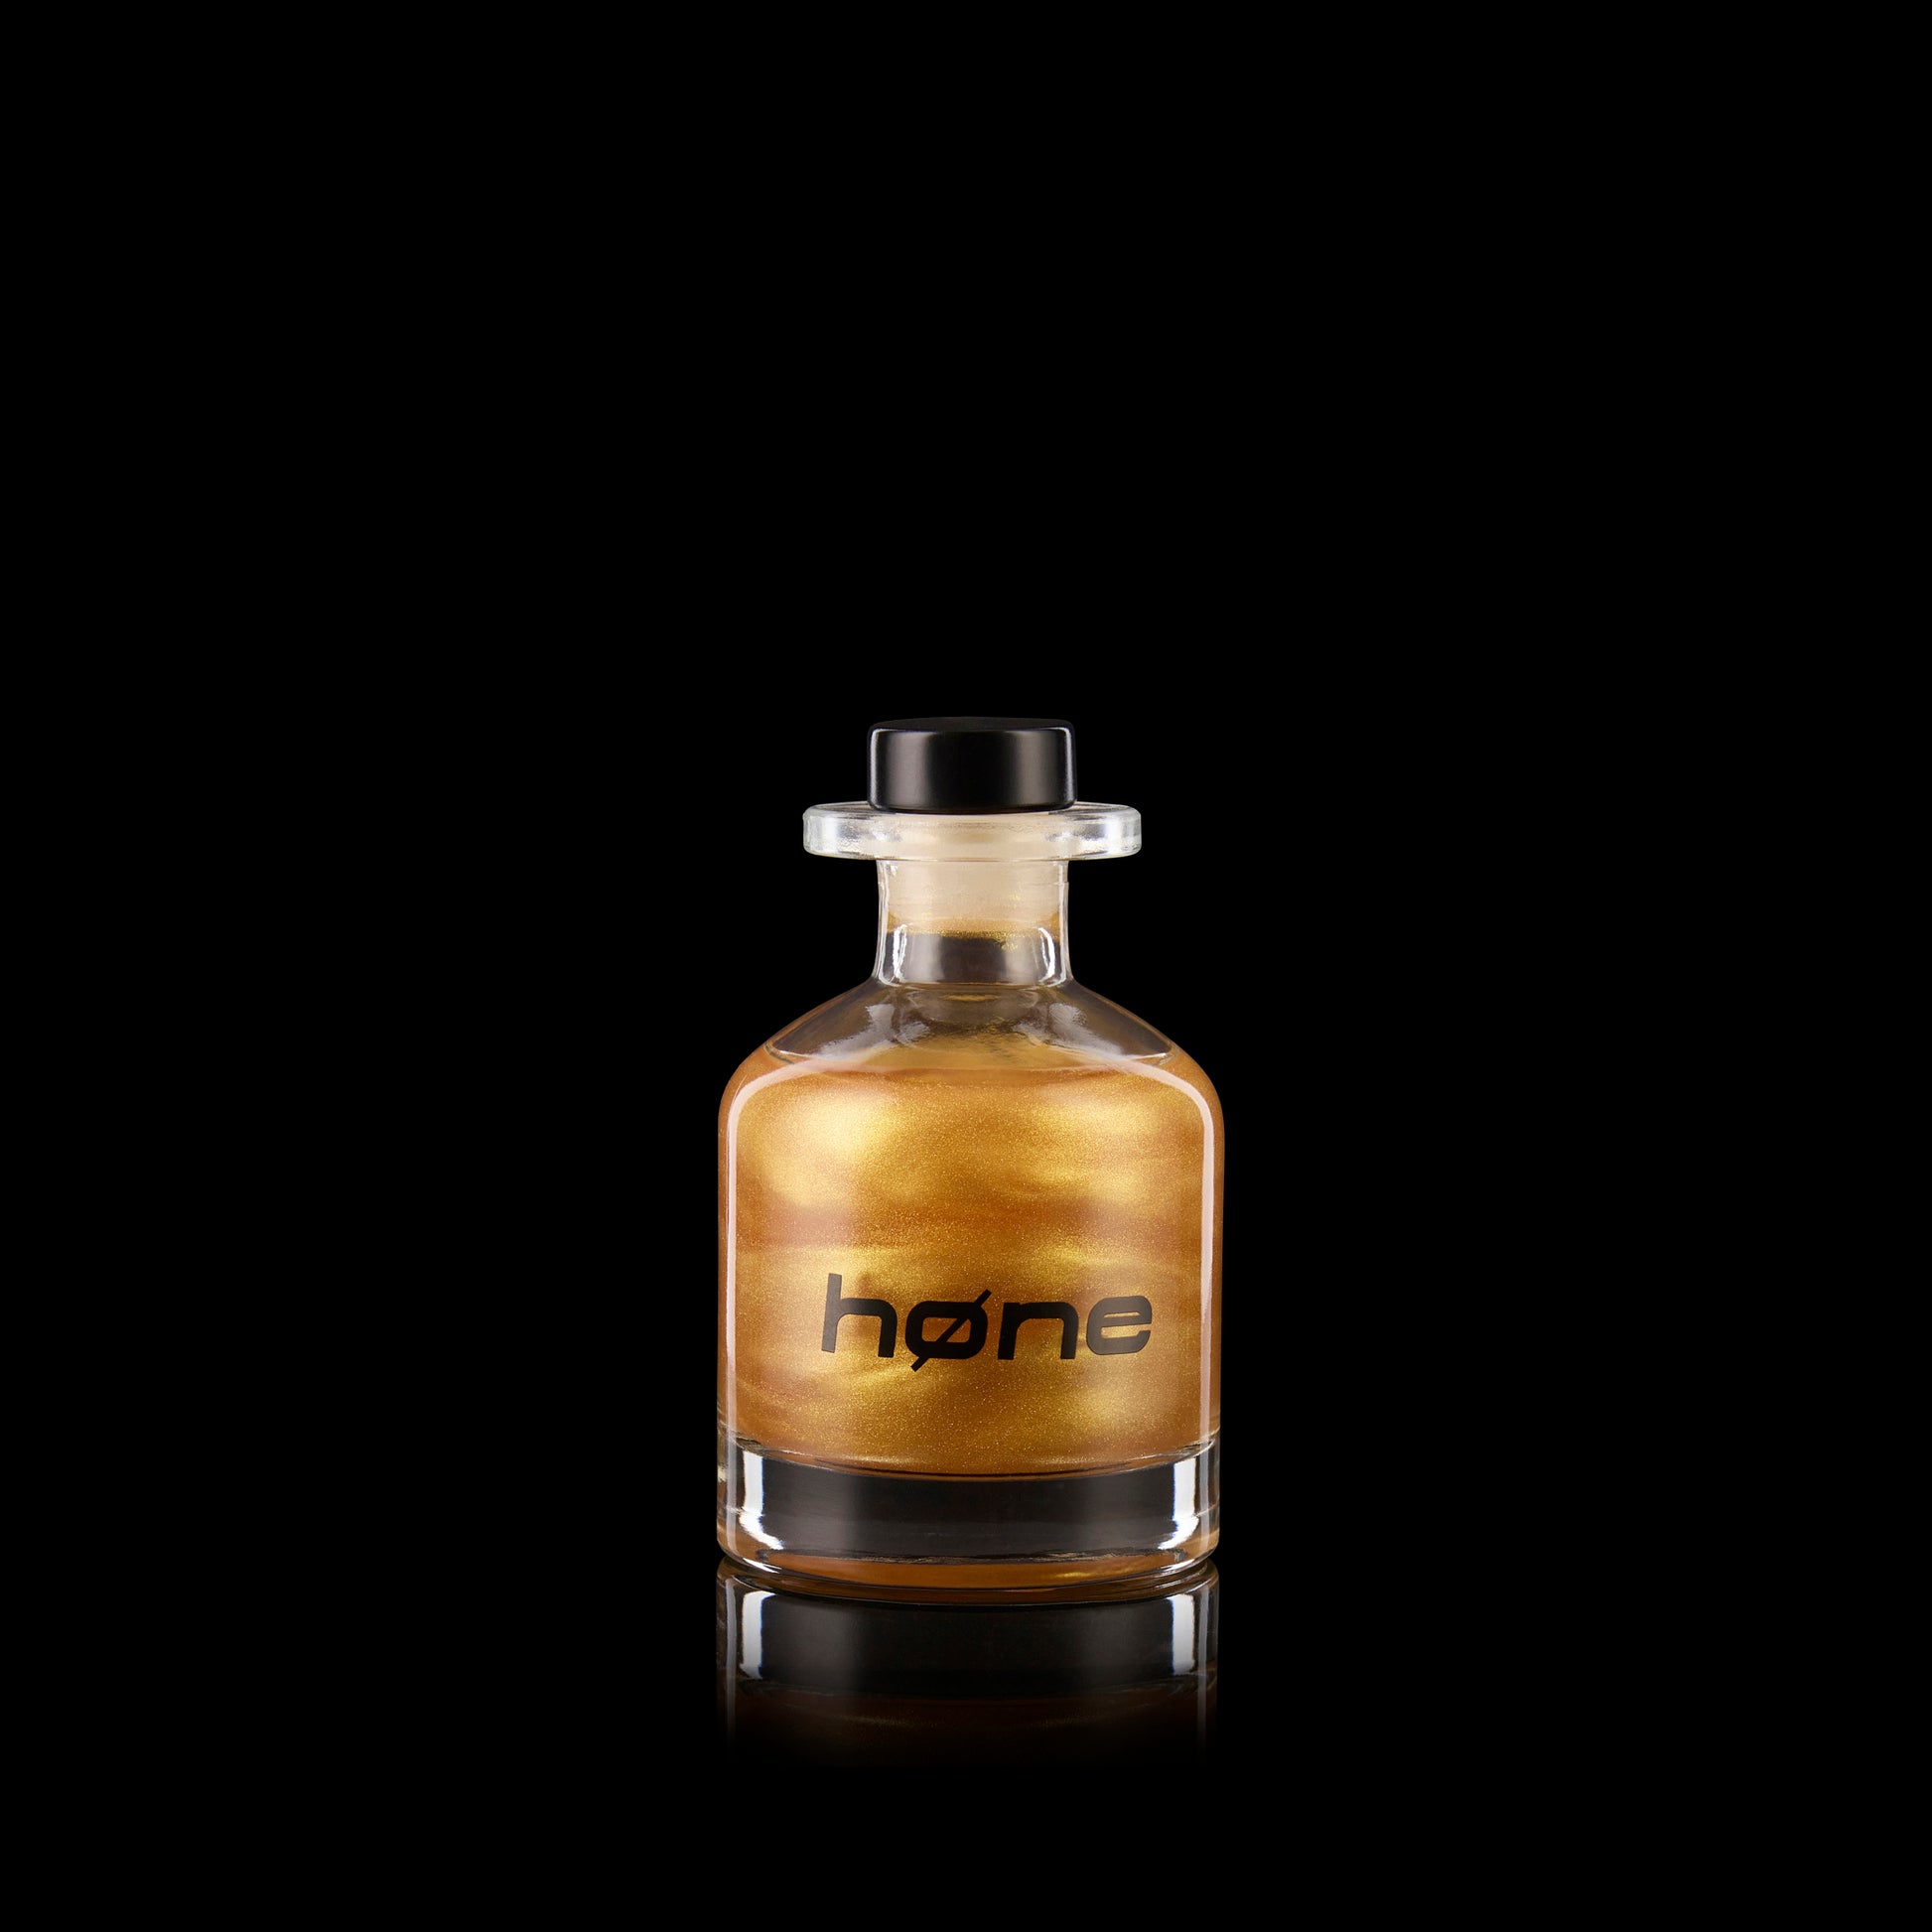 Hand poured, long lasting hone aroma glitter reed diffuser in luxurious gold, on sale in Singapore at a discount